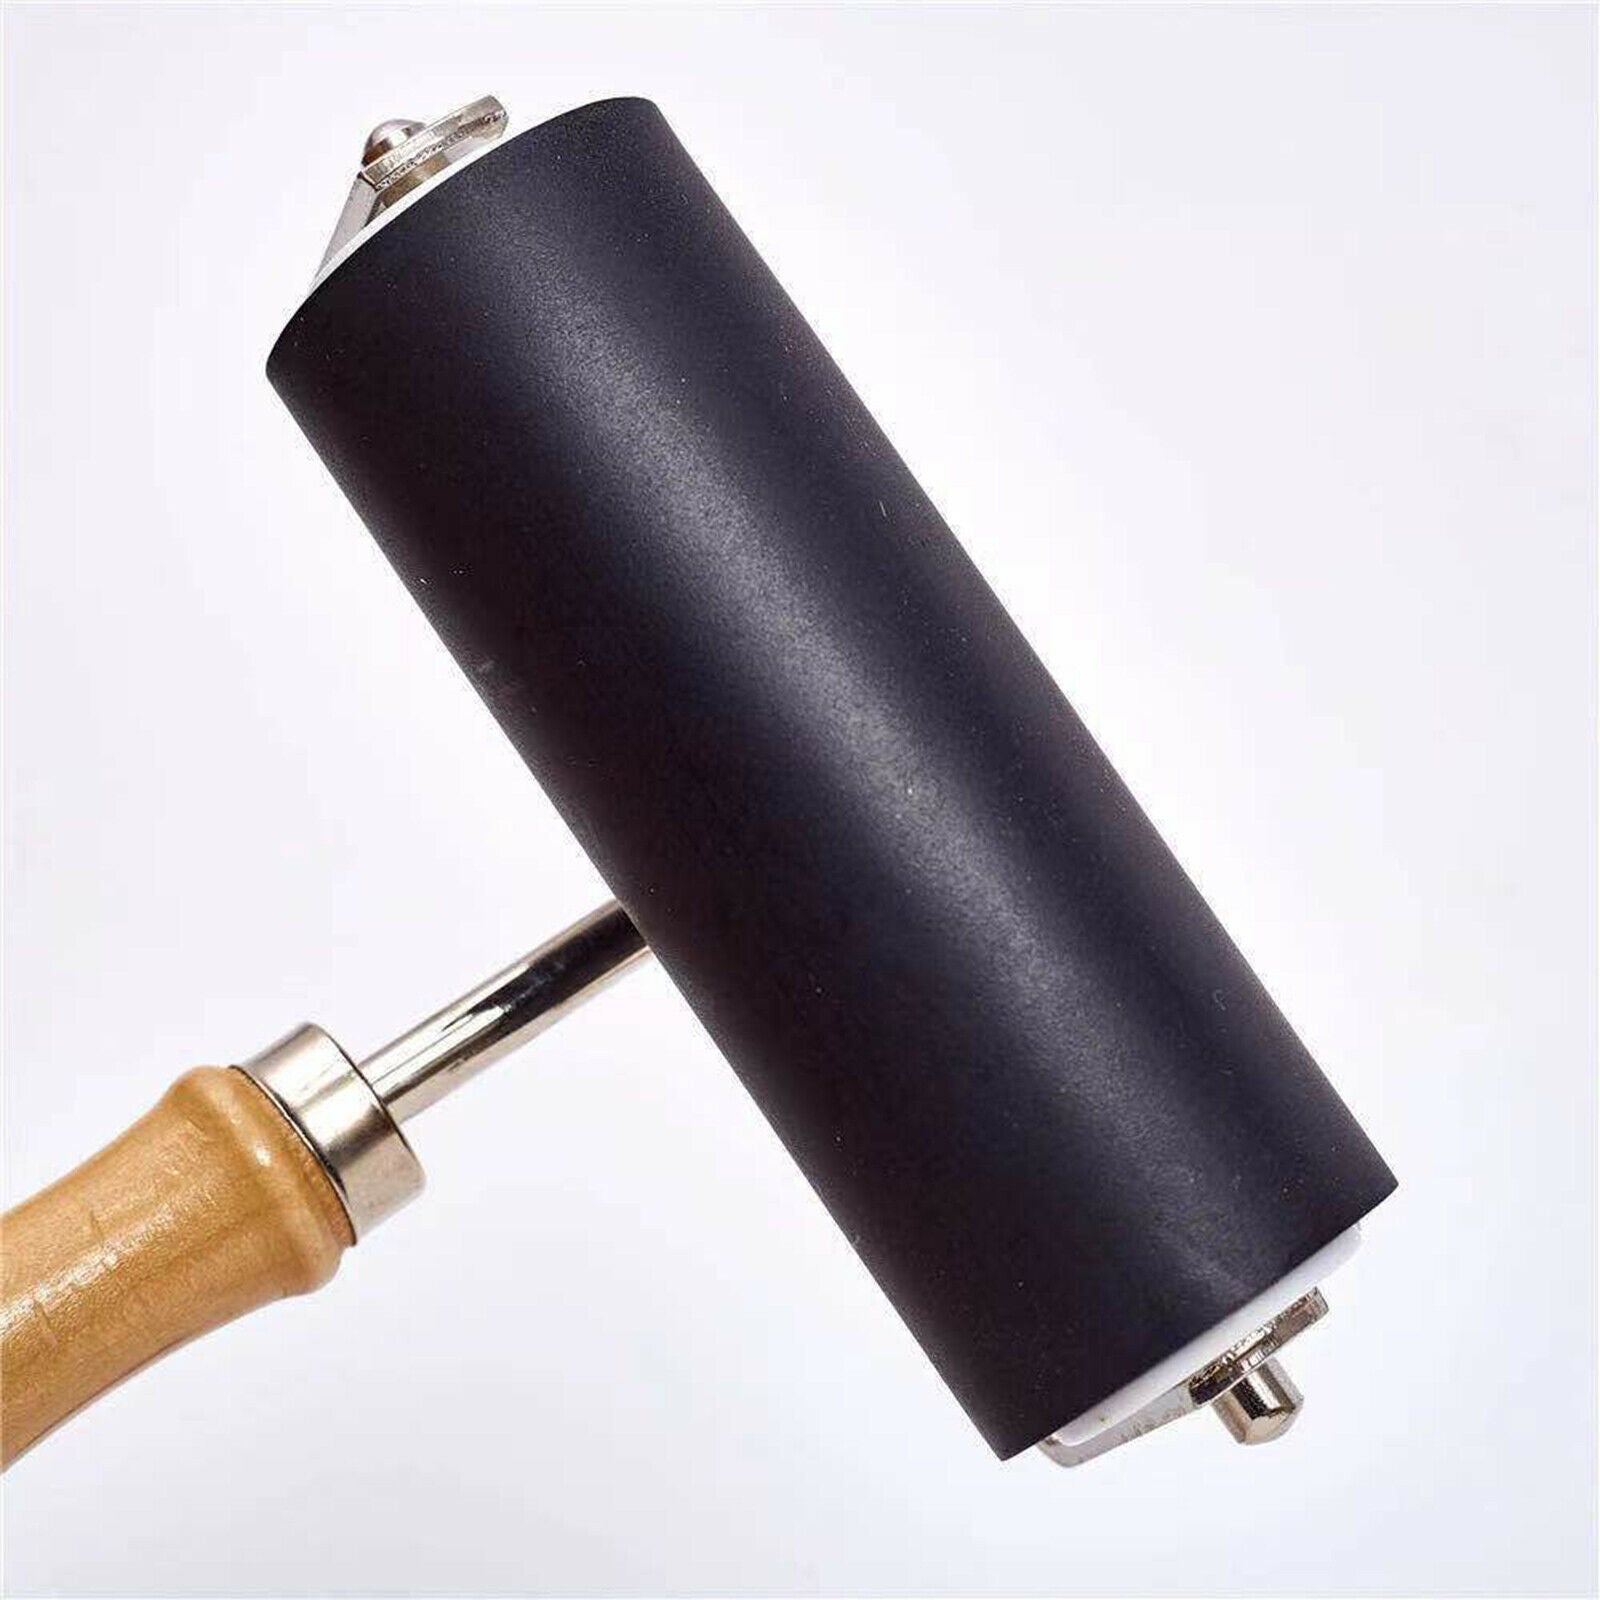 10cm Deluxe Rubber Roller Glue Brayer for Stamping Gluing Arts Crafts Tool